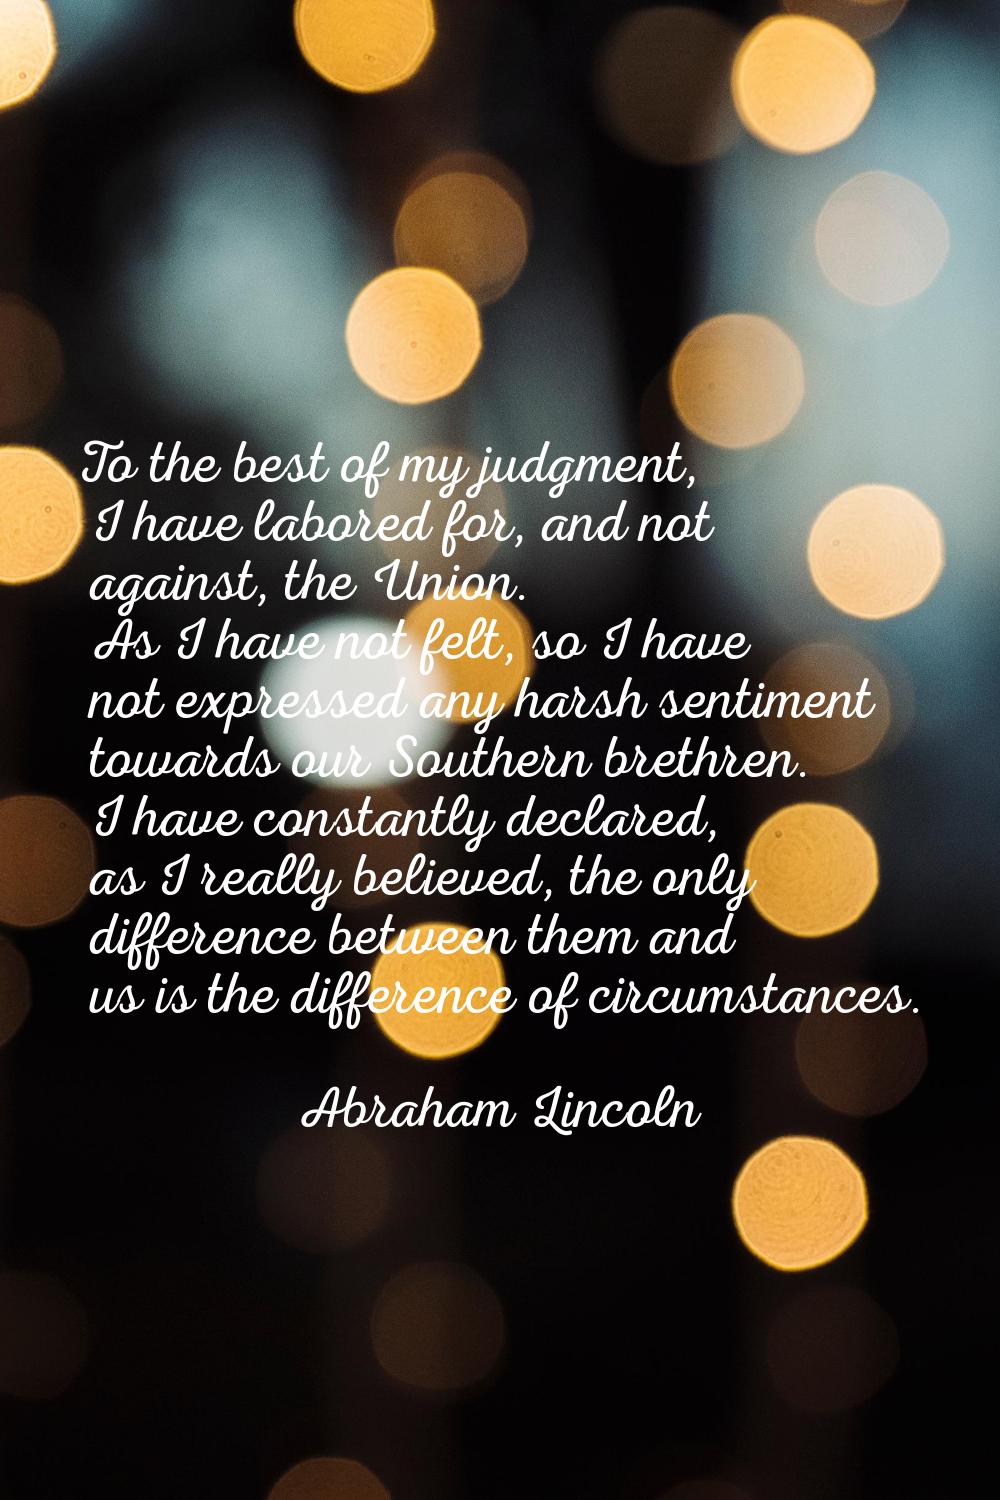 To the best of my judgment, I have labored for, and not against, the Union. As I have not felt, so 